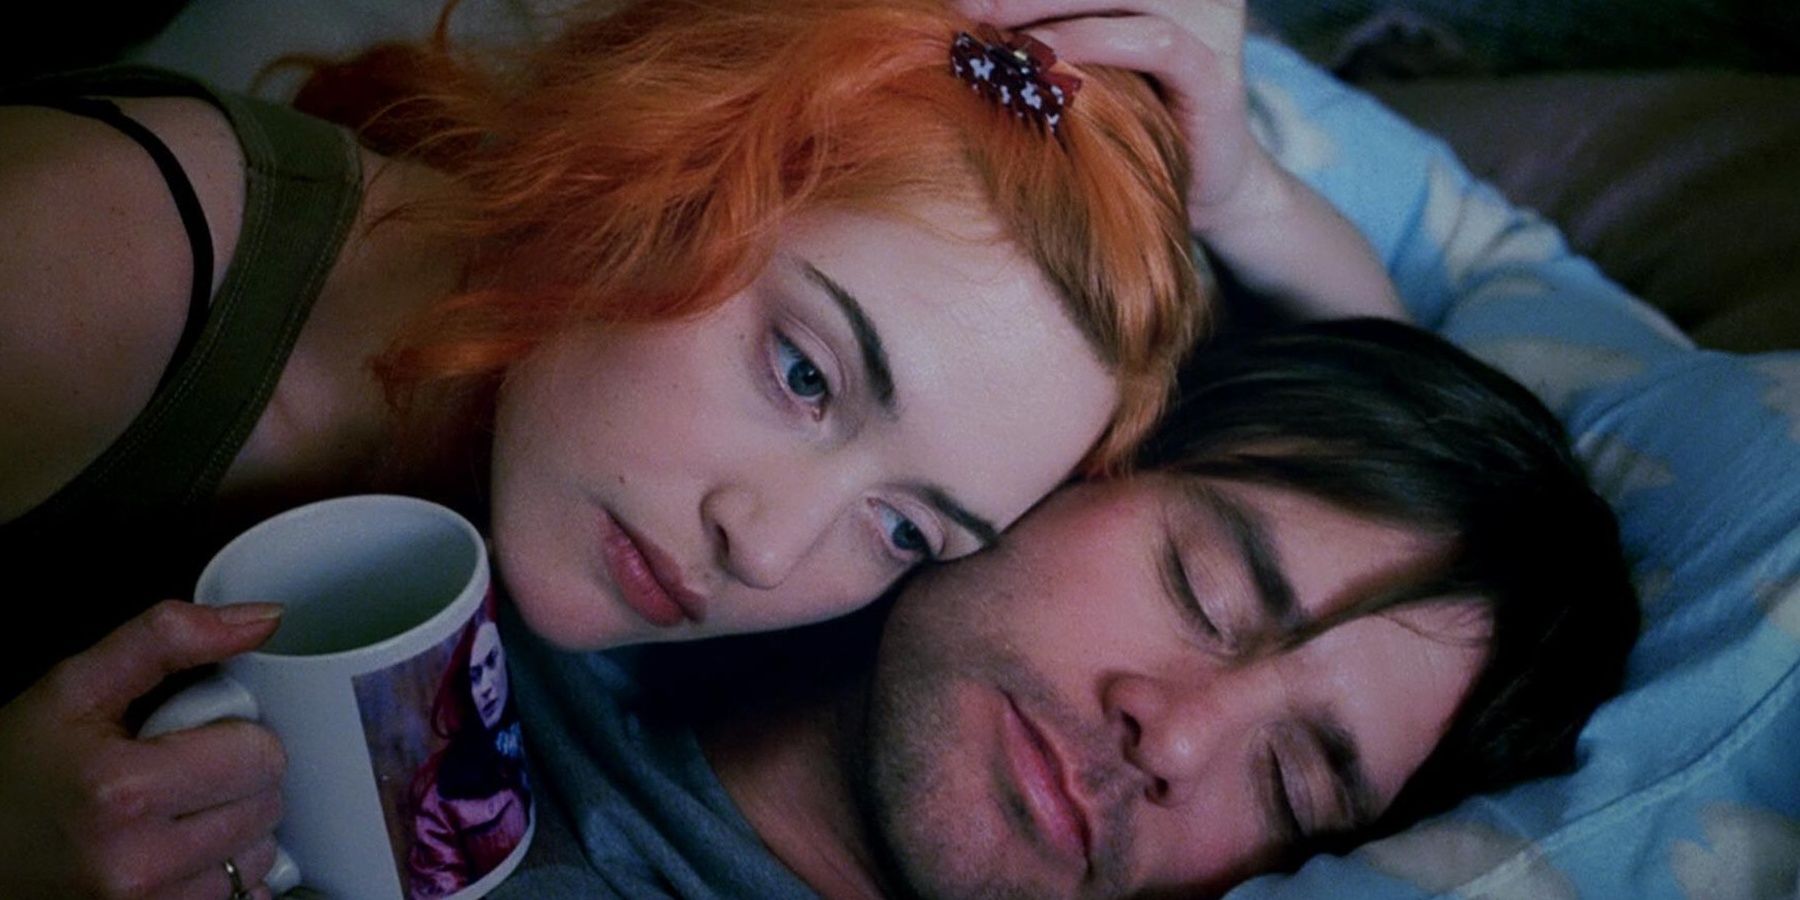 Clementine and Joel in bed